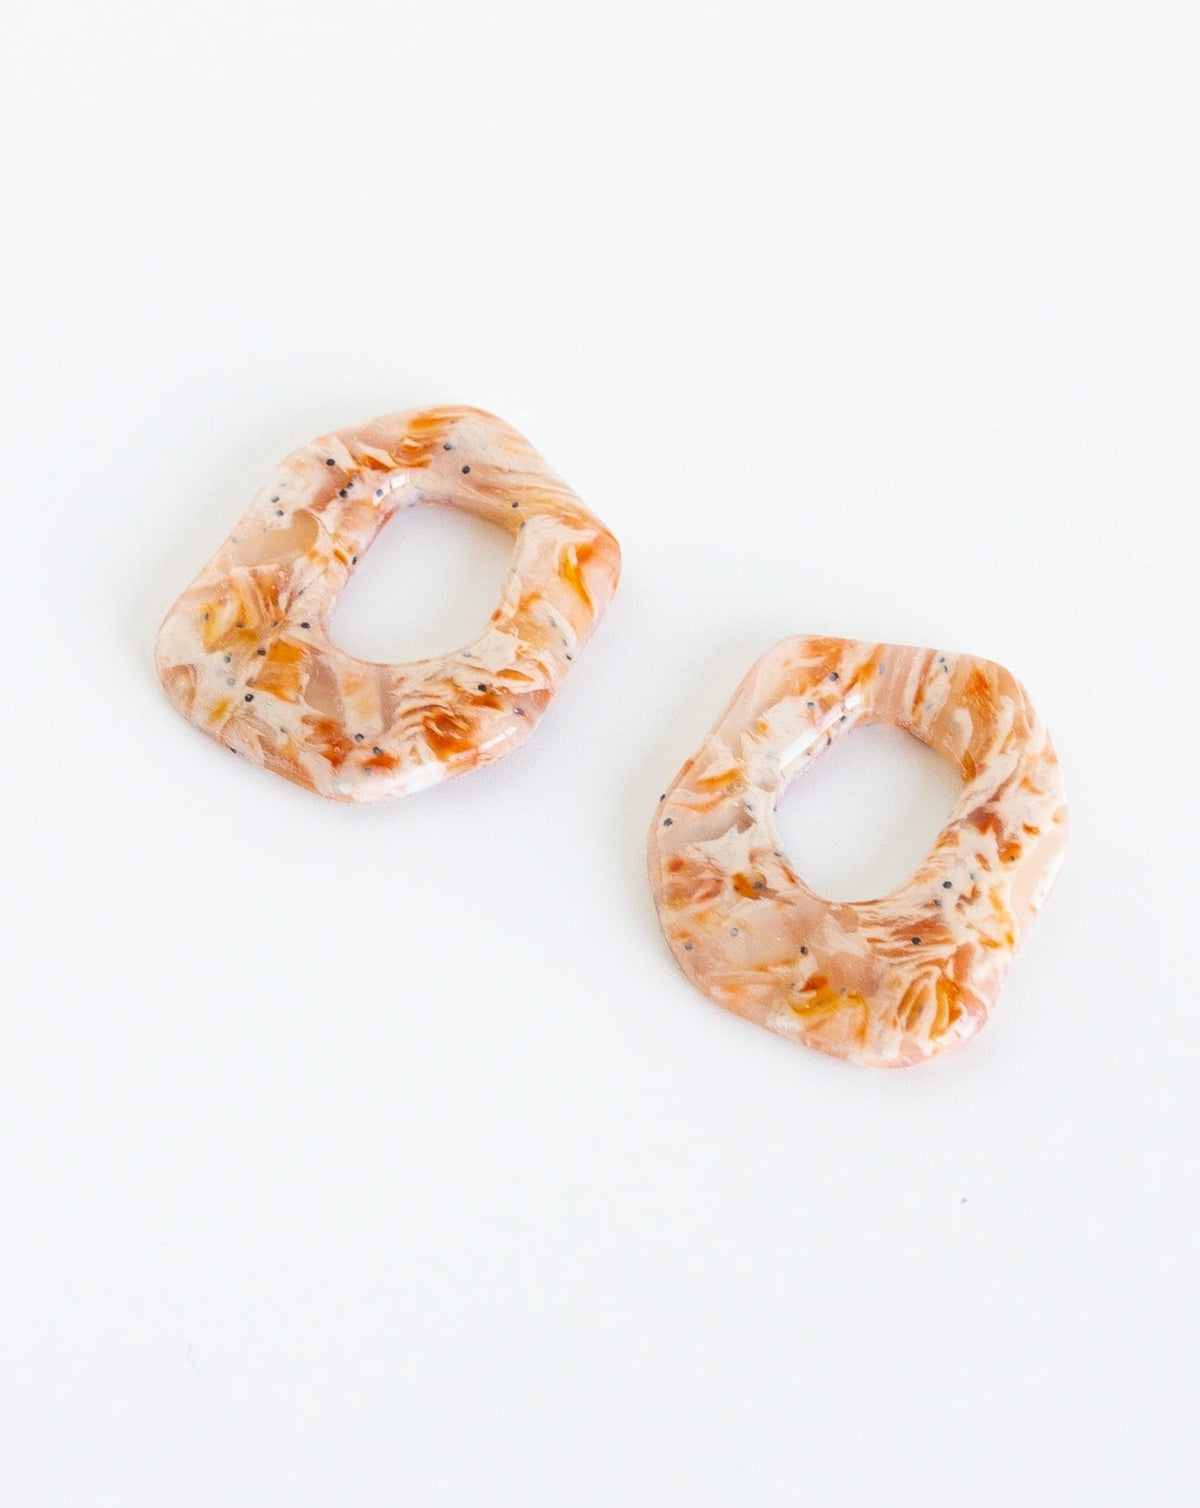 Angled view of Darien Beads in Marble Orange color